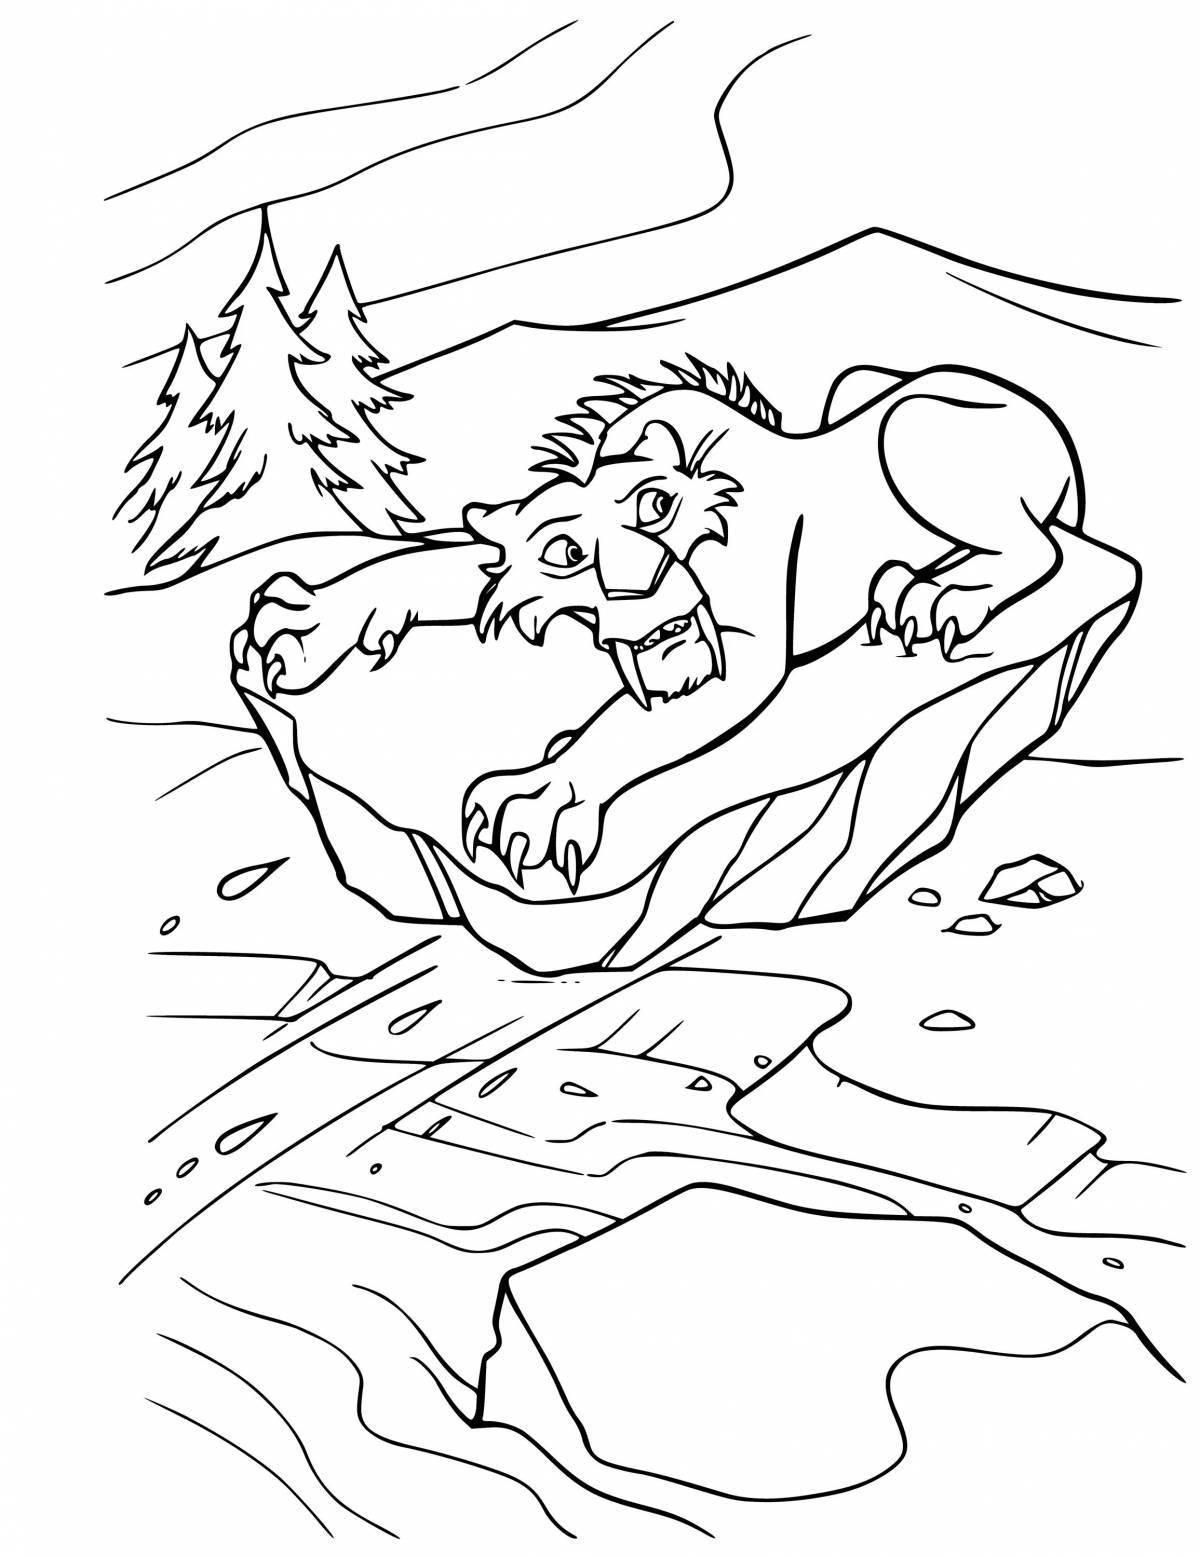 Cautious Ice Joyful Coloring Page